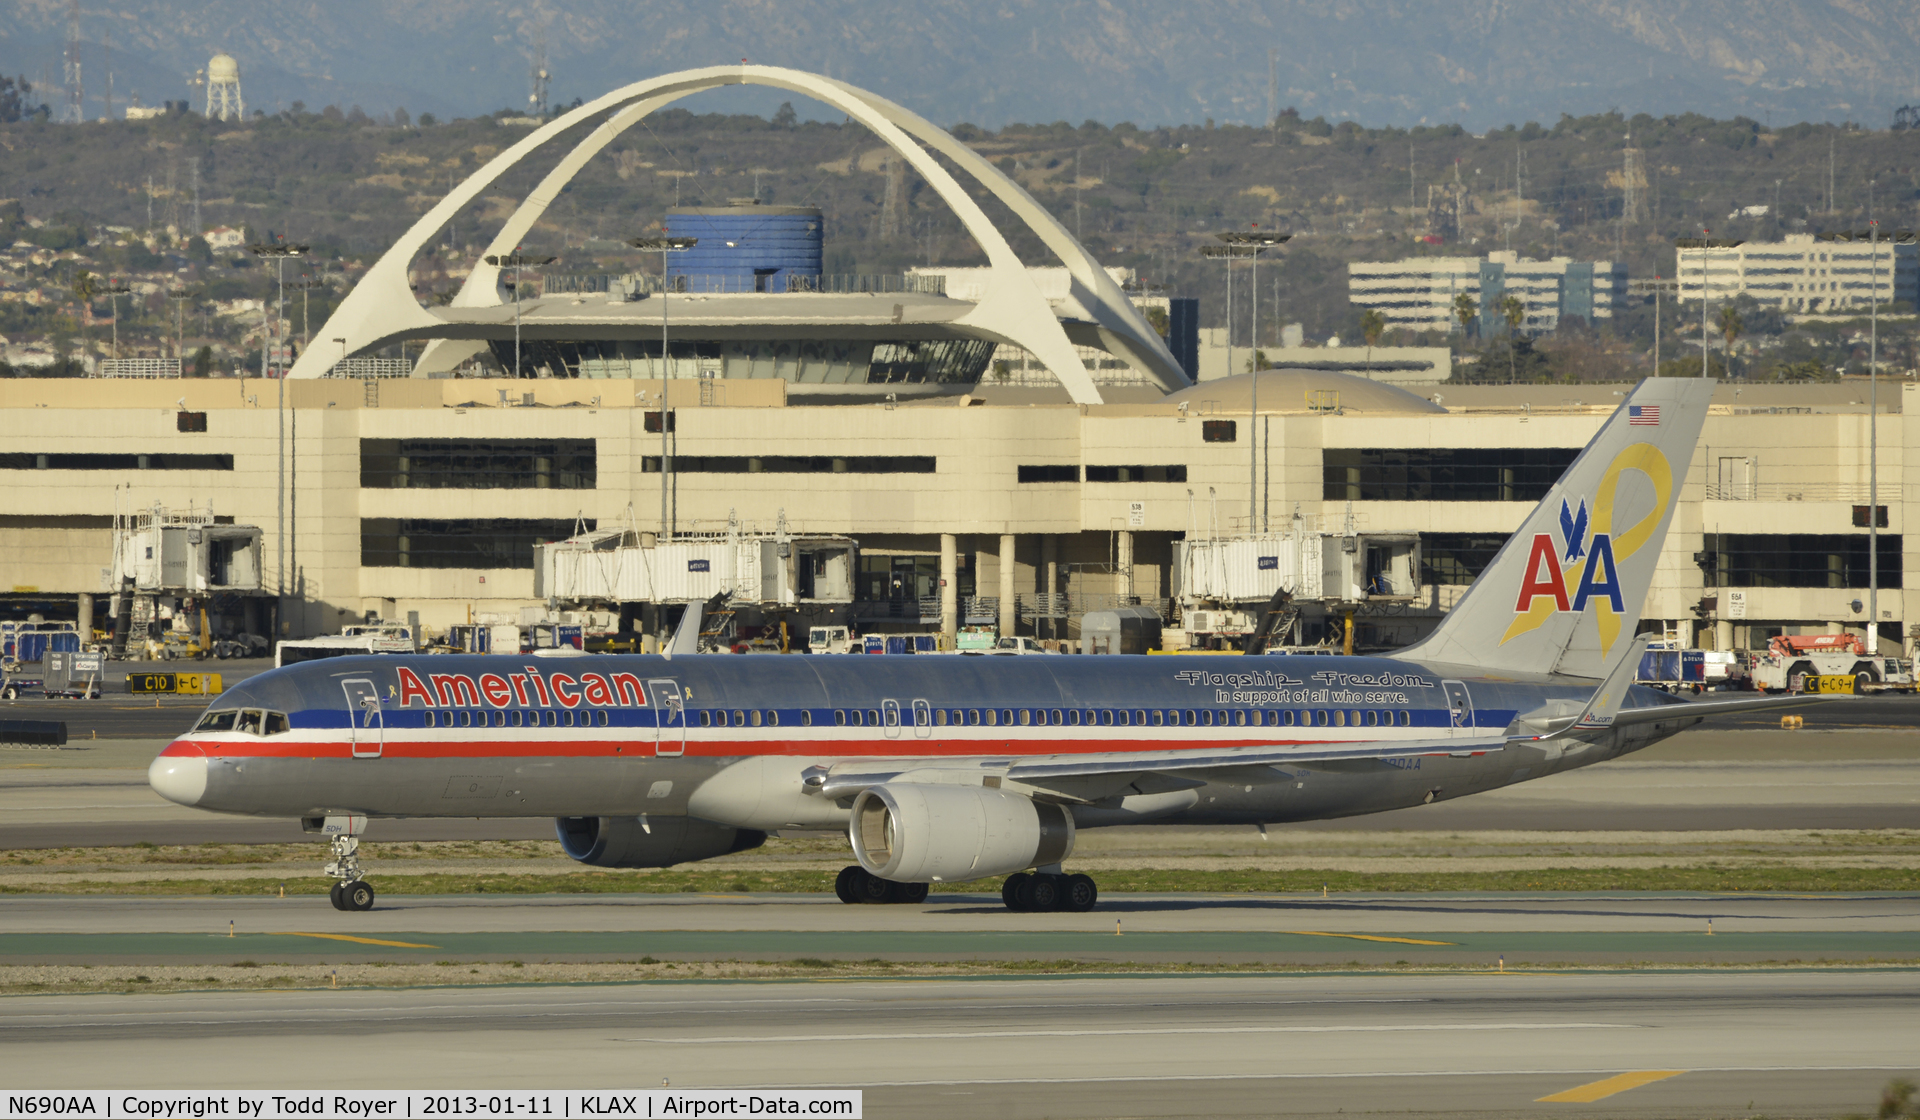 N690AA, 1993 Boeing 757-223 C/N 25696, Arriving at LAX on 25L